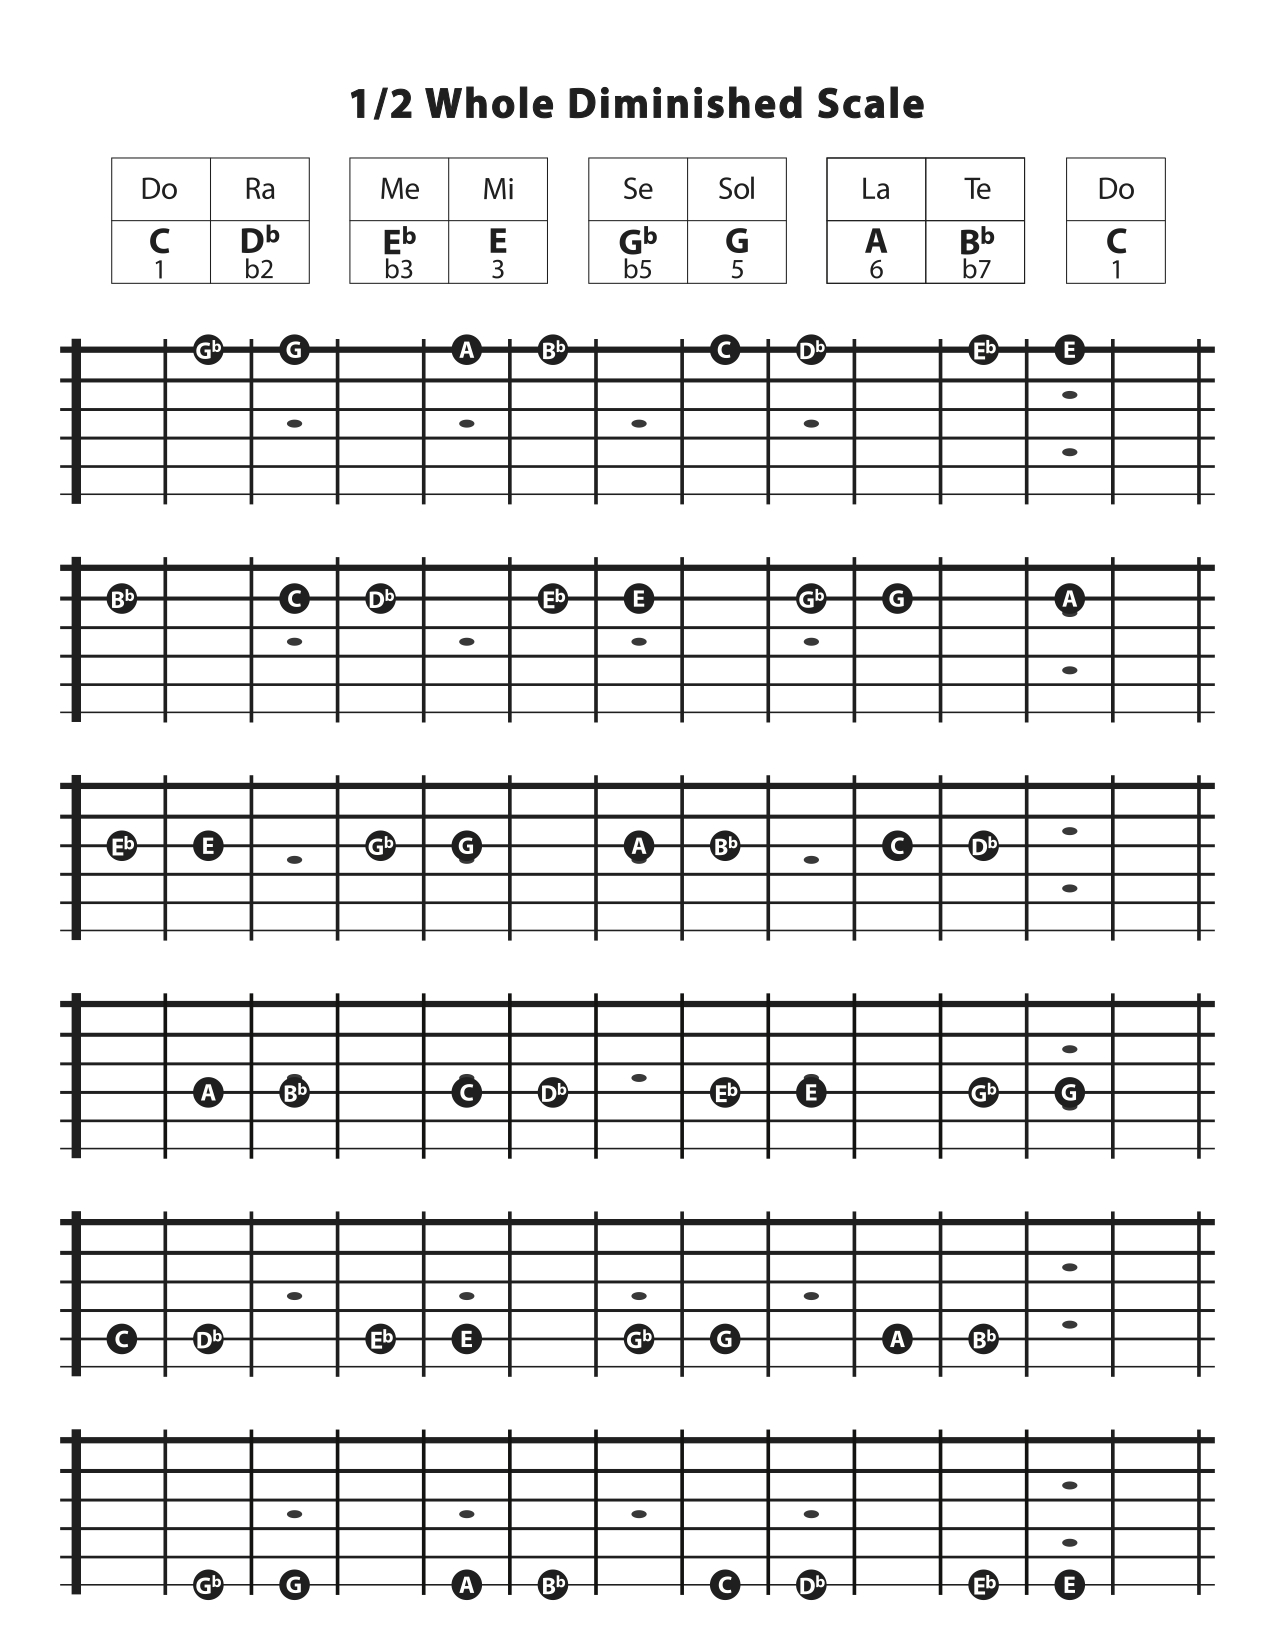 The linear fingerings of the half whole diminished scale